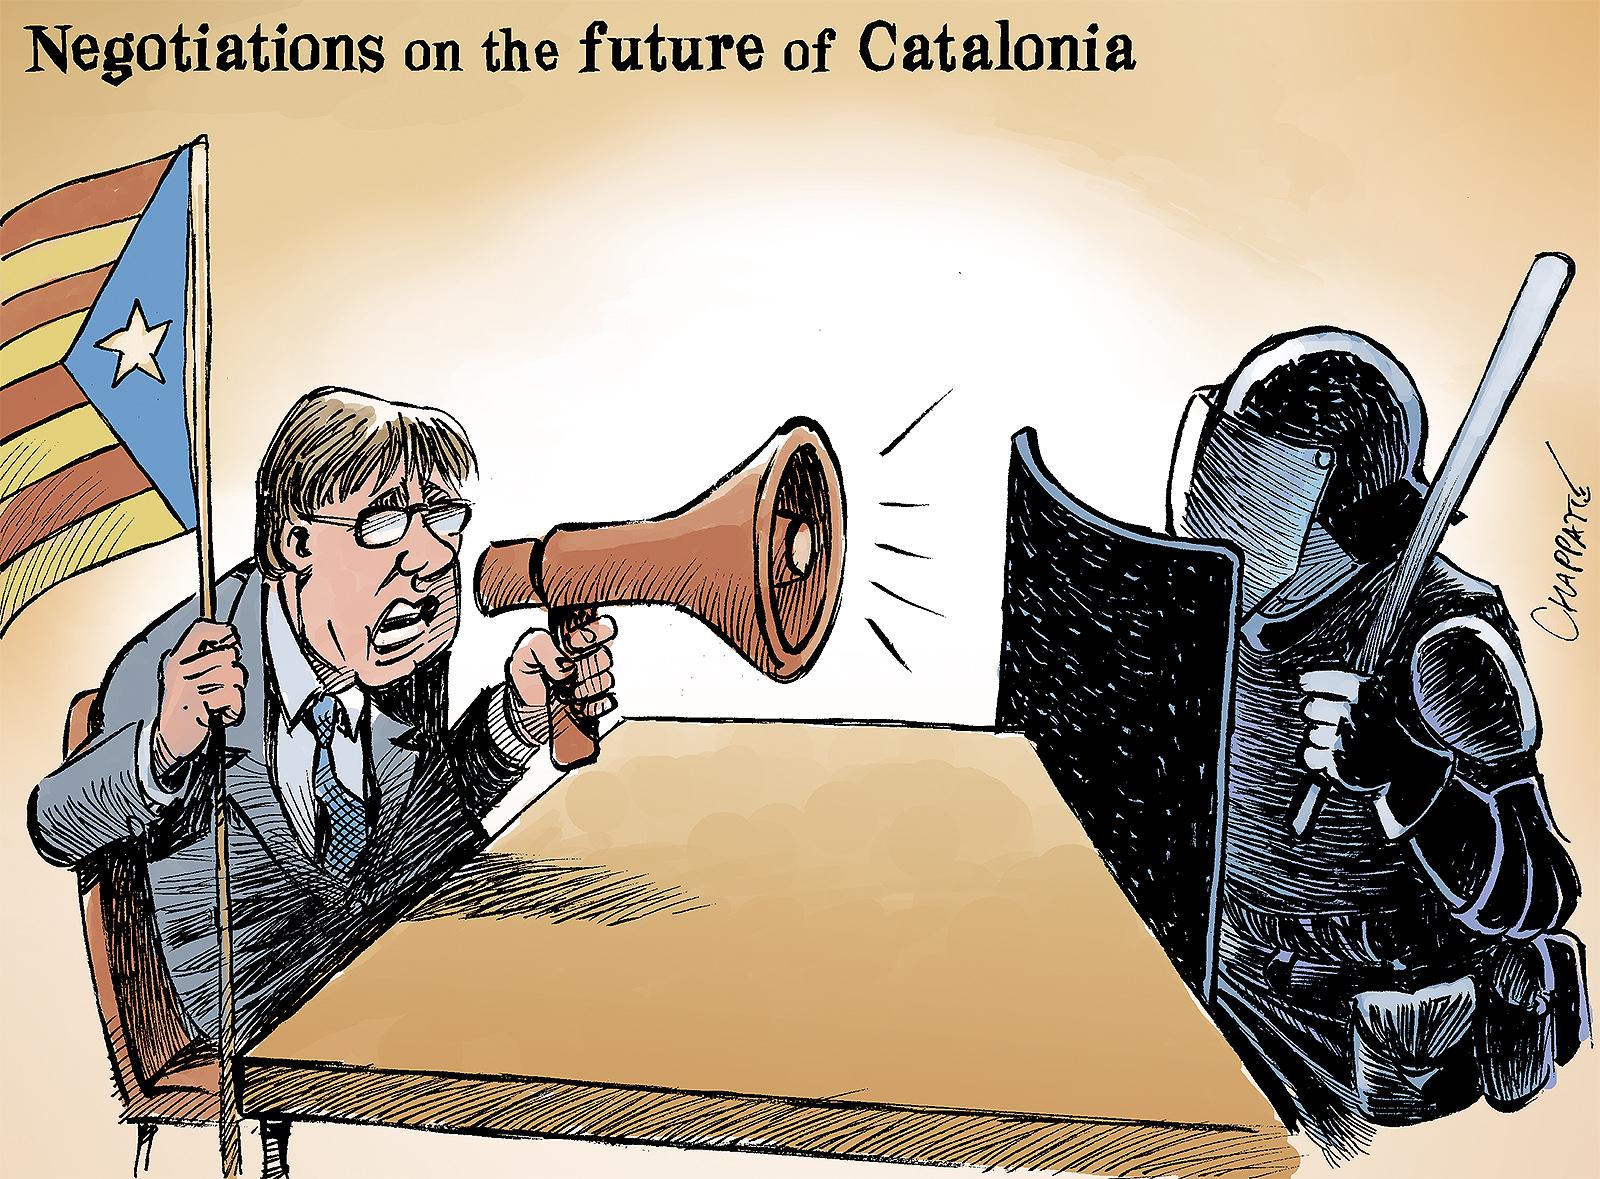 Spain: and now?